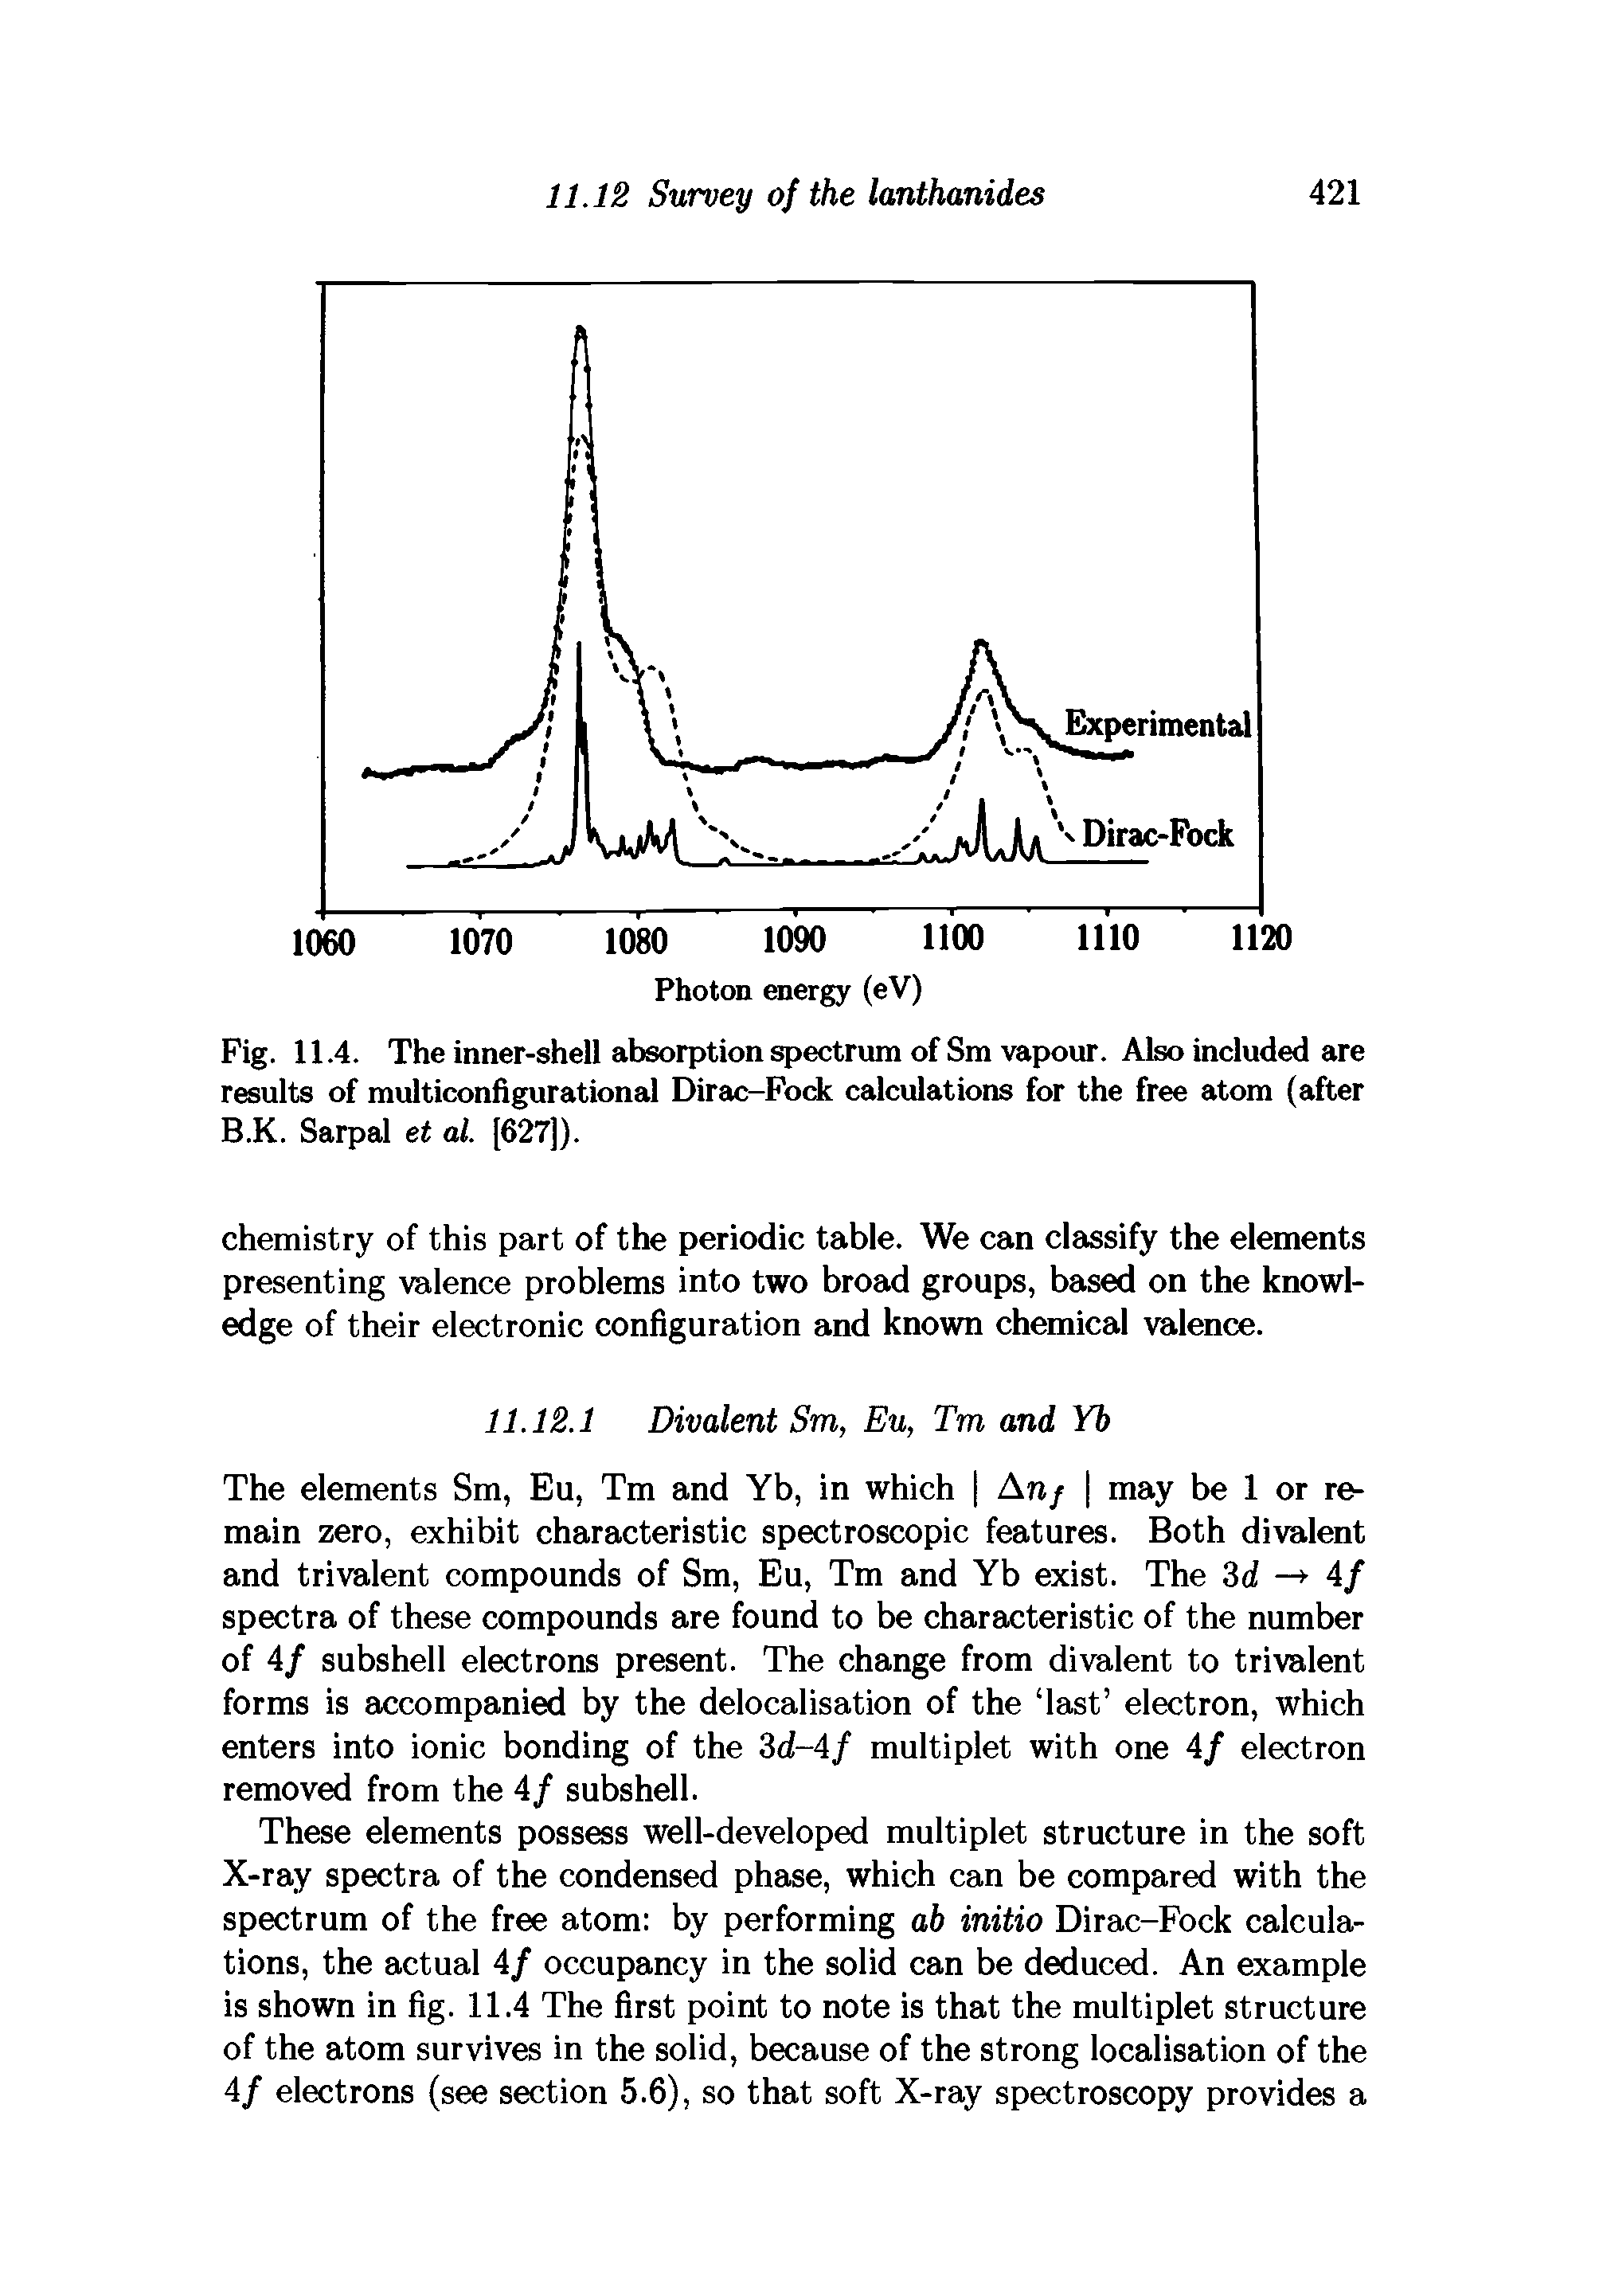 Fig. 11.4. The inner-shell absorption spectrum of Sm vapour. Also included are results of multiconfigurational Dirac-Fock calculations for the free atom (after B.K. Sarpal et al. [627]).